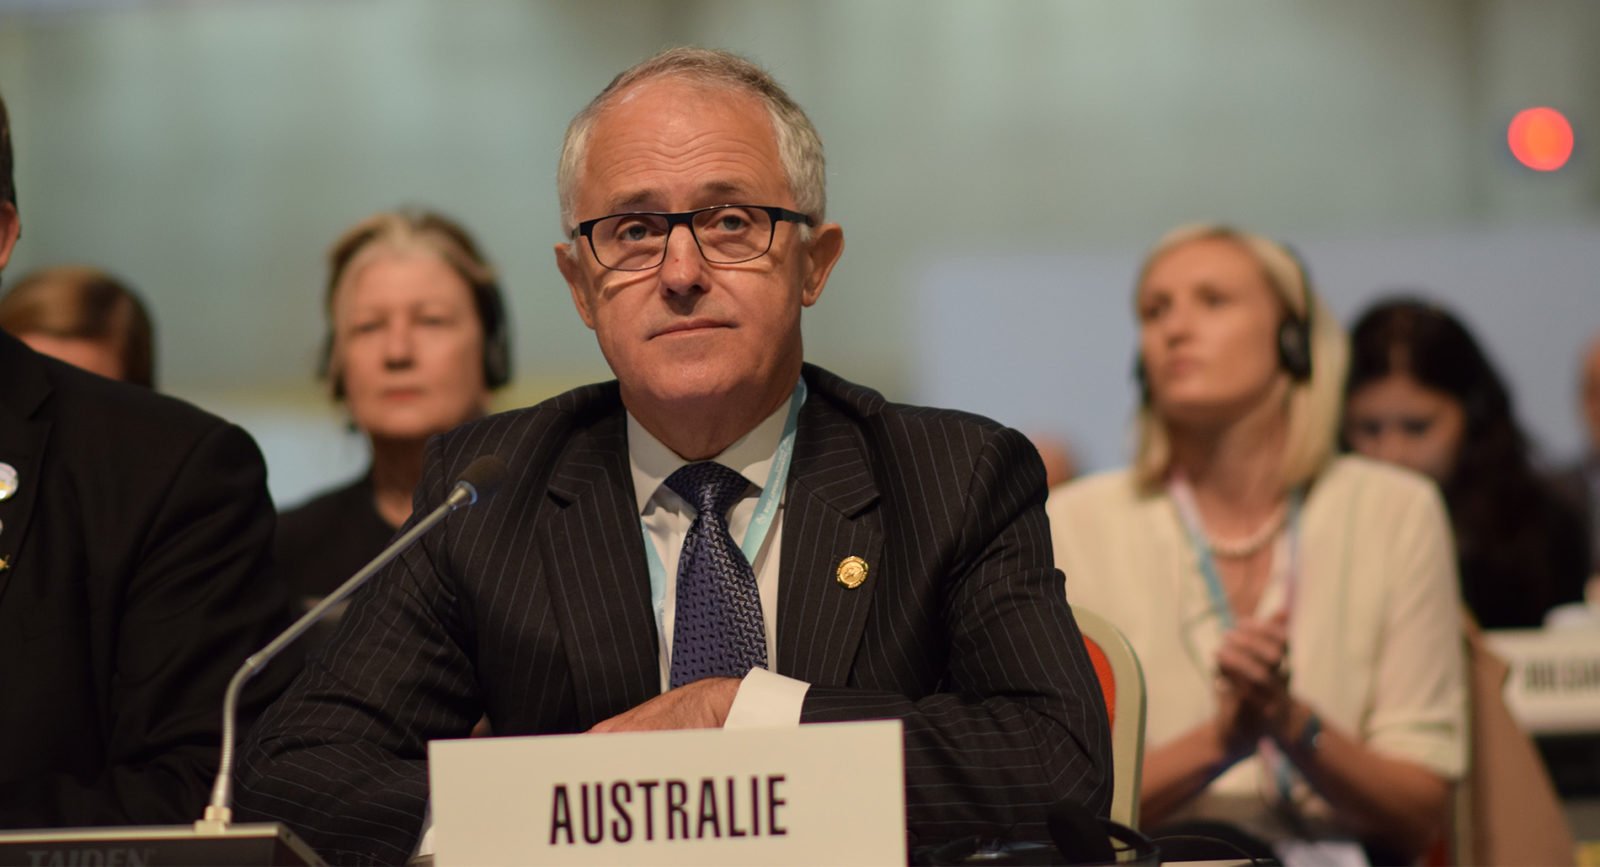 Prime Minister Malcolm Turnbull in front of a placeholder that reads 'Australie'. © Flickr/Veni